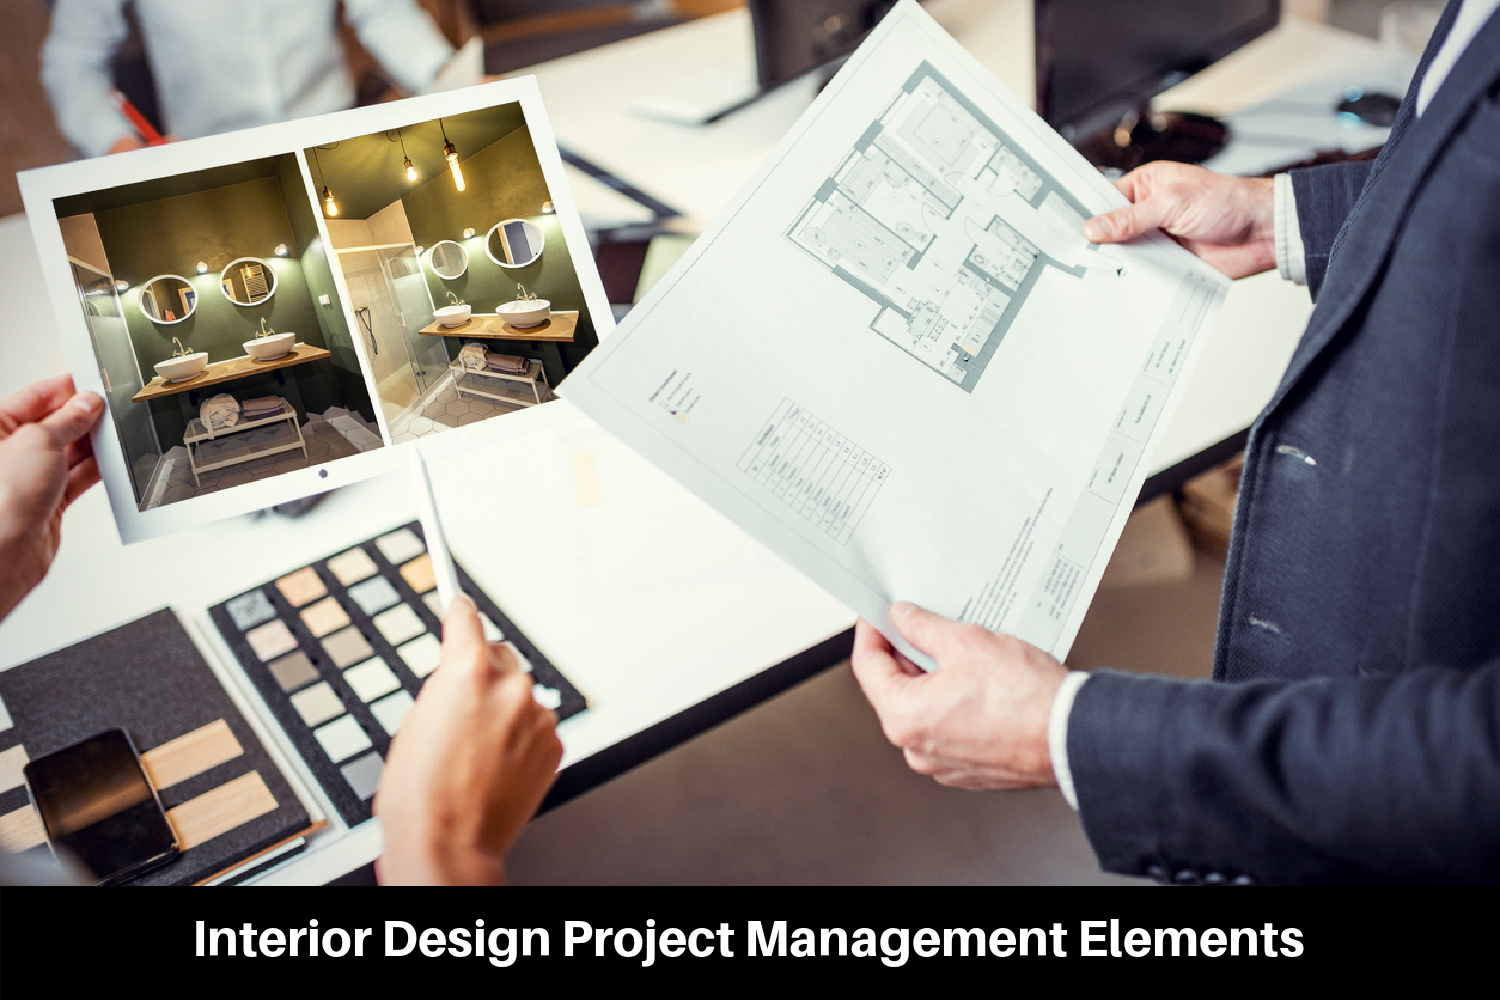 How to Improve Your Interior Design Project Management Skills